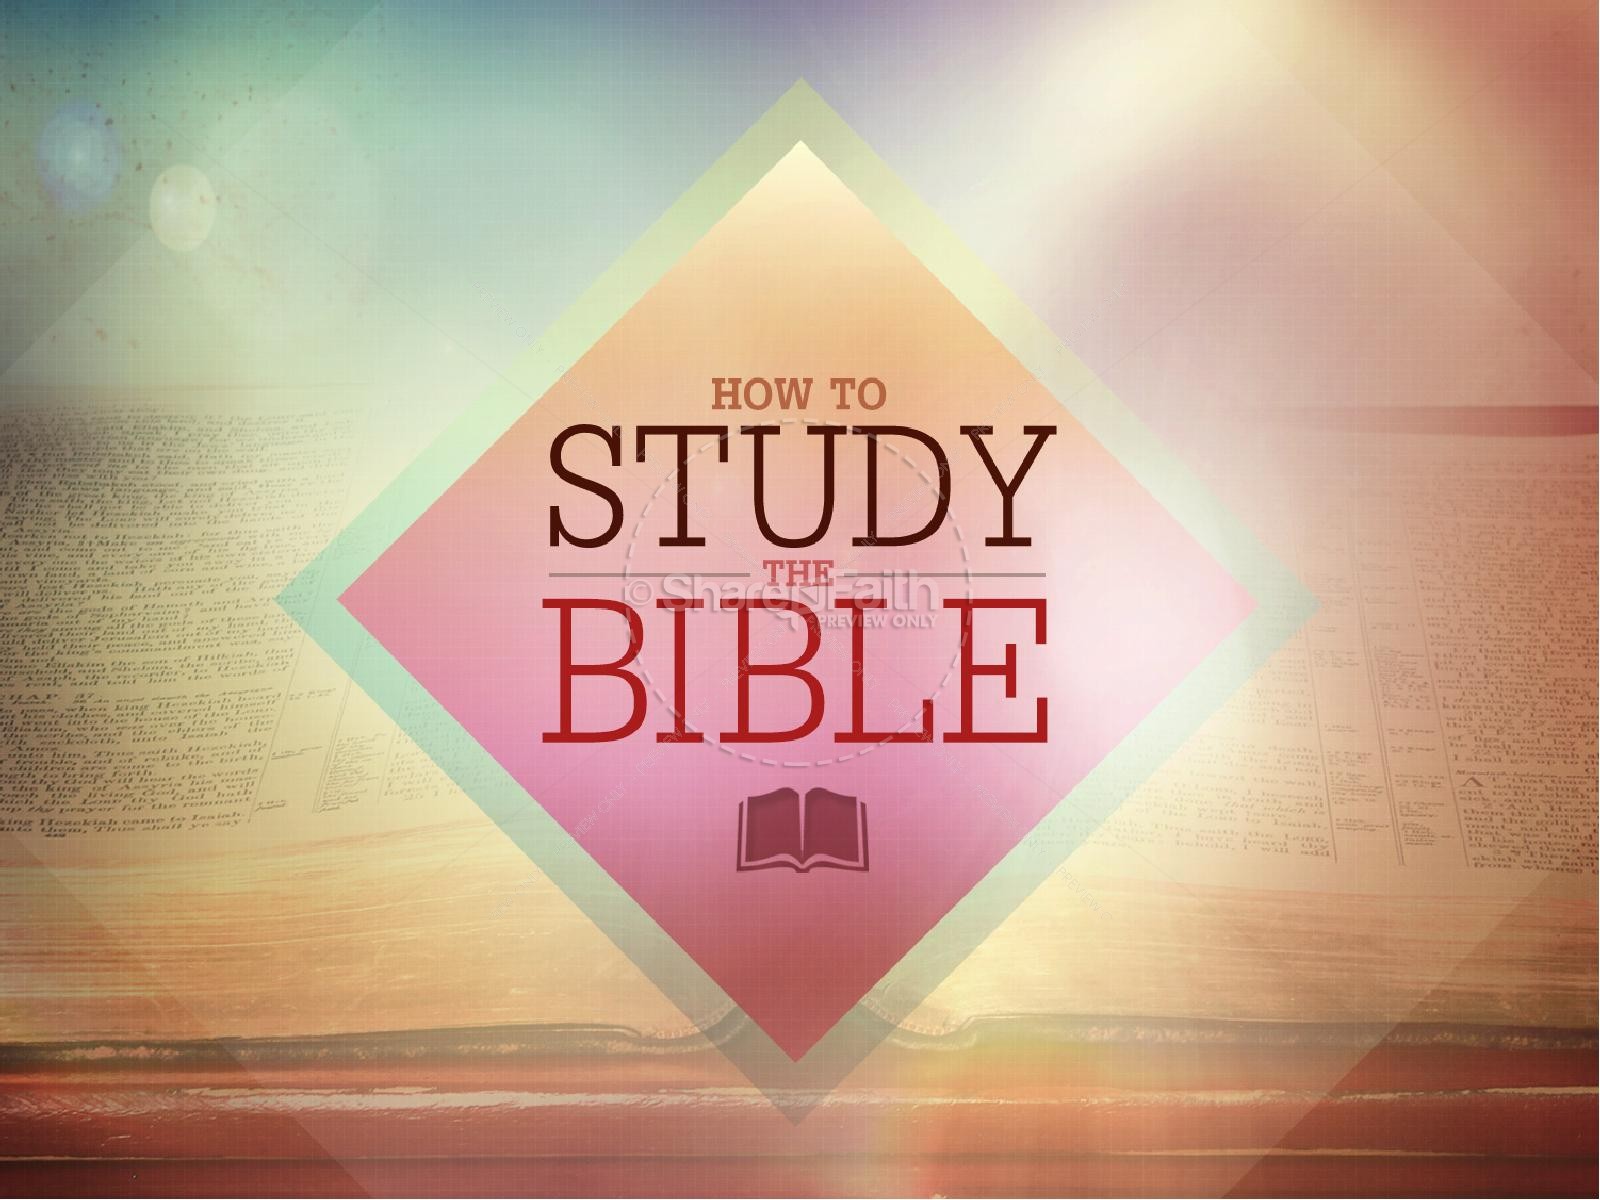 How to Study the Bible Power Point Template